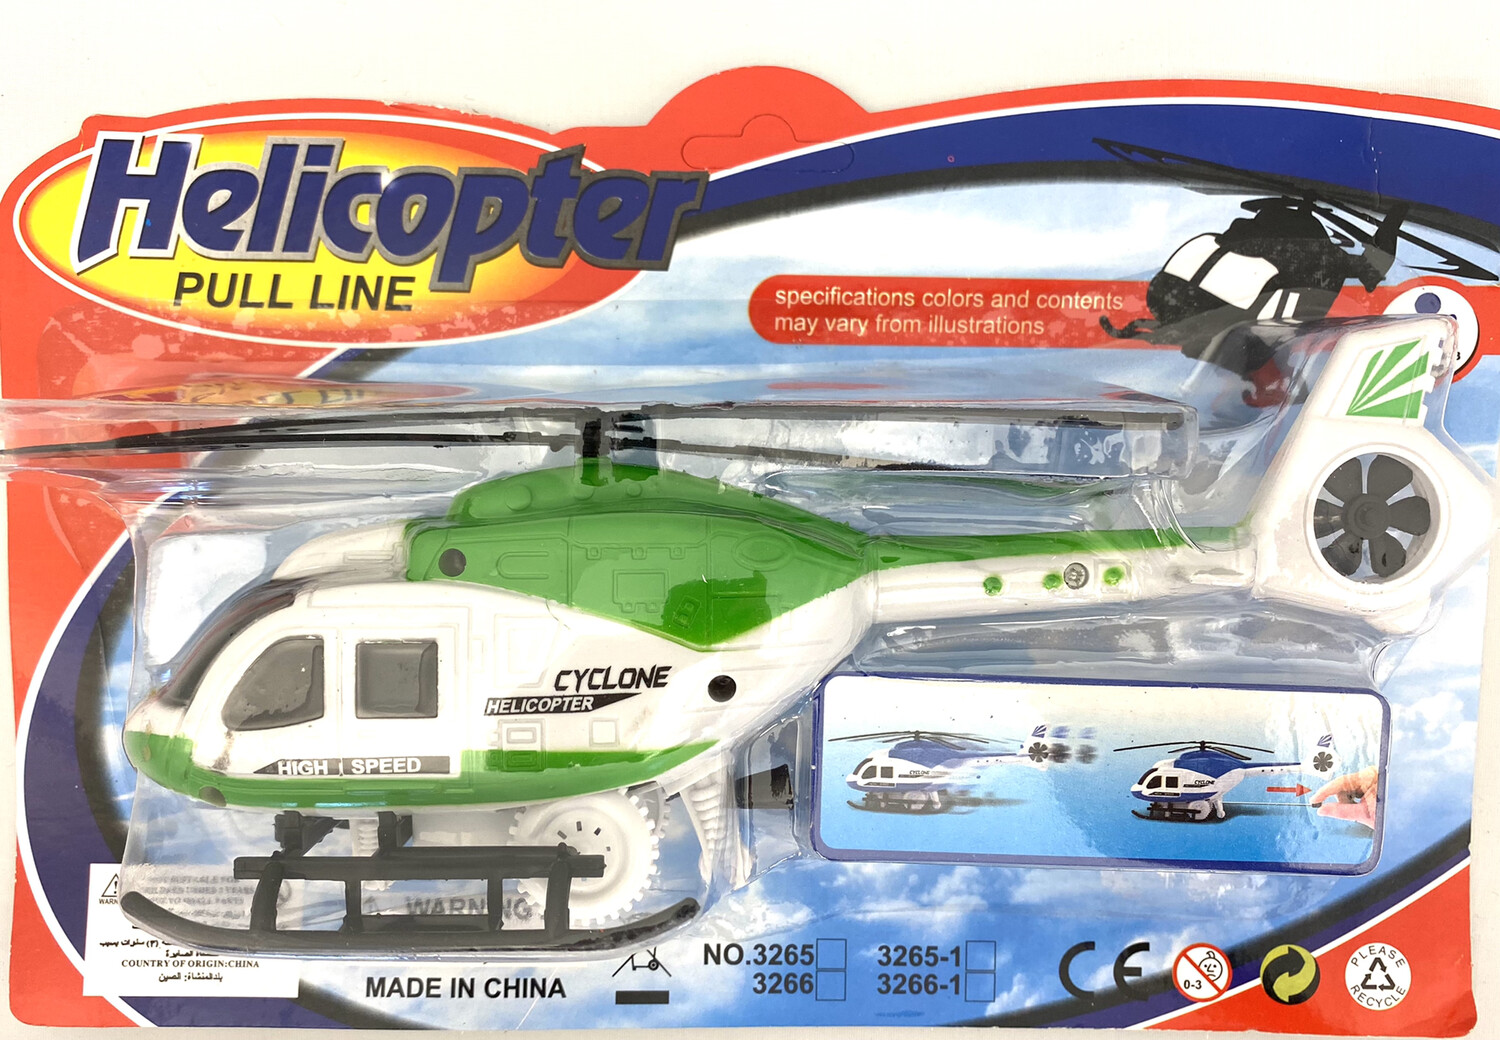 $4.99 TOY MIX / PULL BACK PULLBACK HELICOPTER / 310 - HS-9018